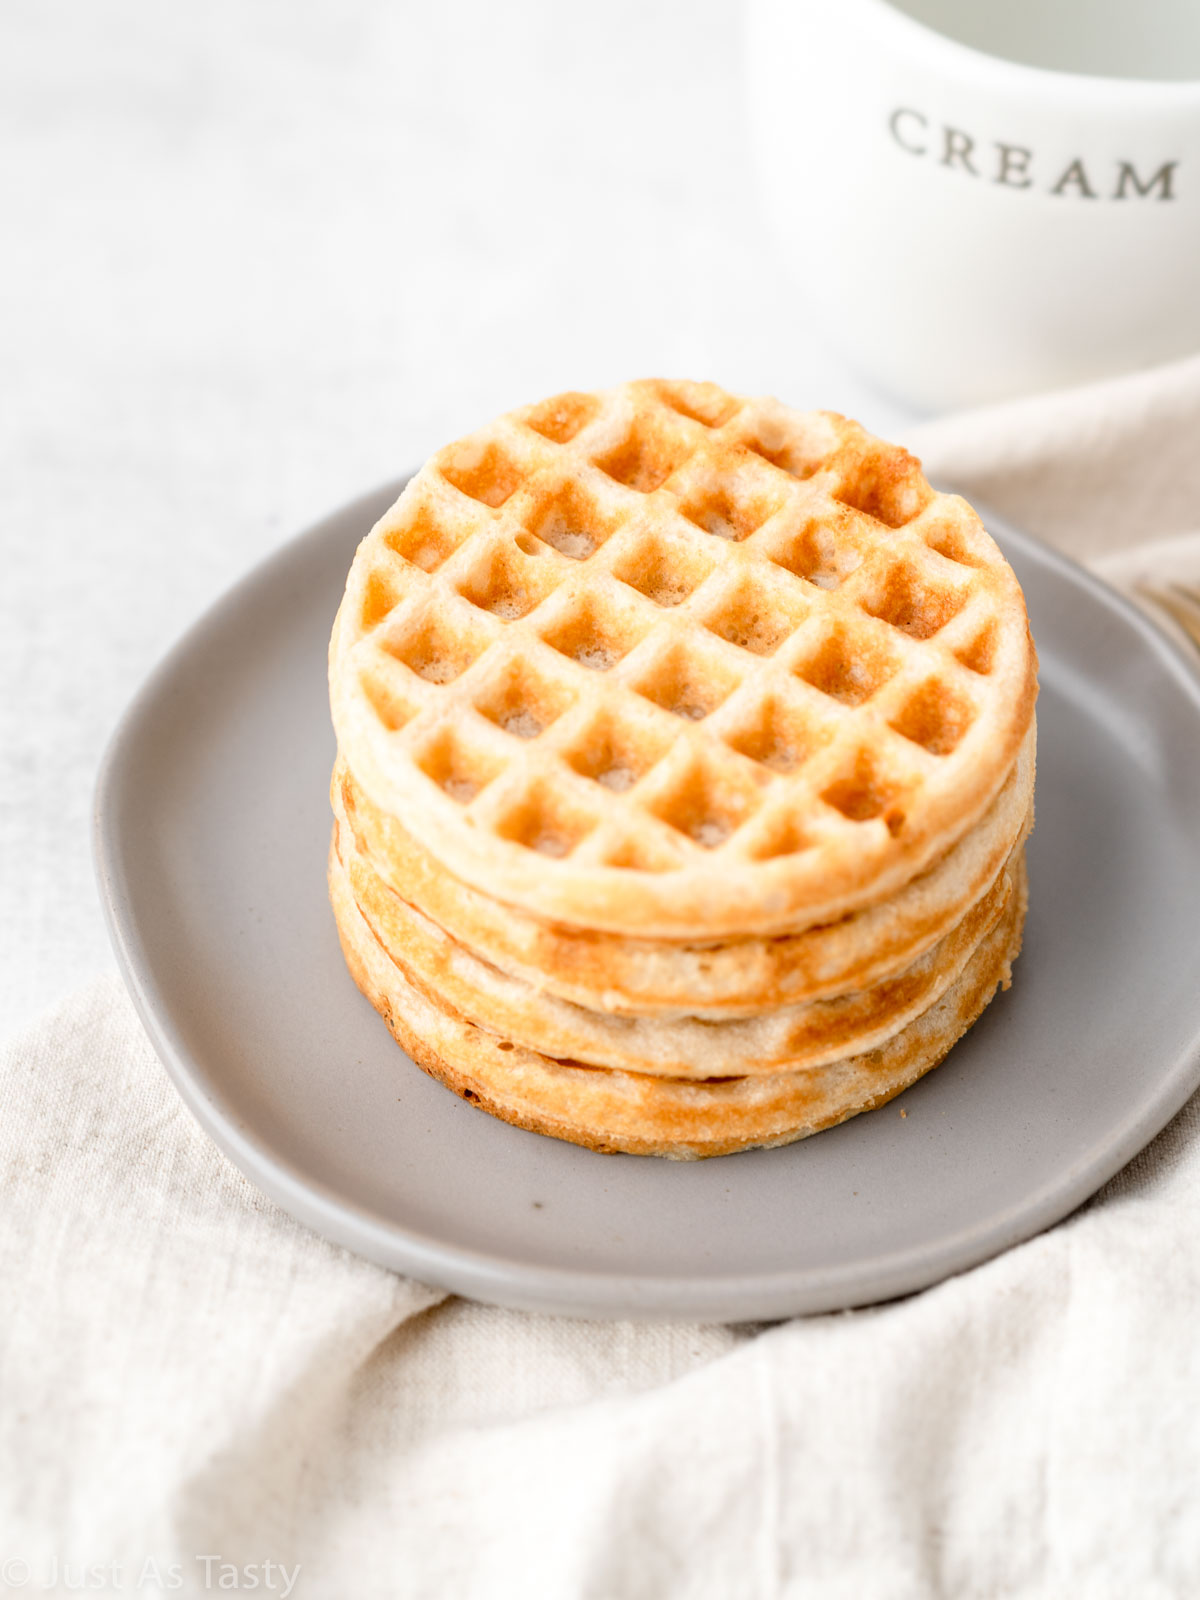 Gluten free waffles stacked on a plate.